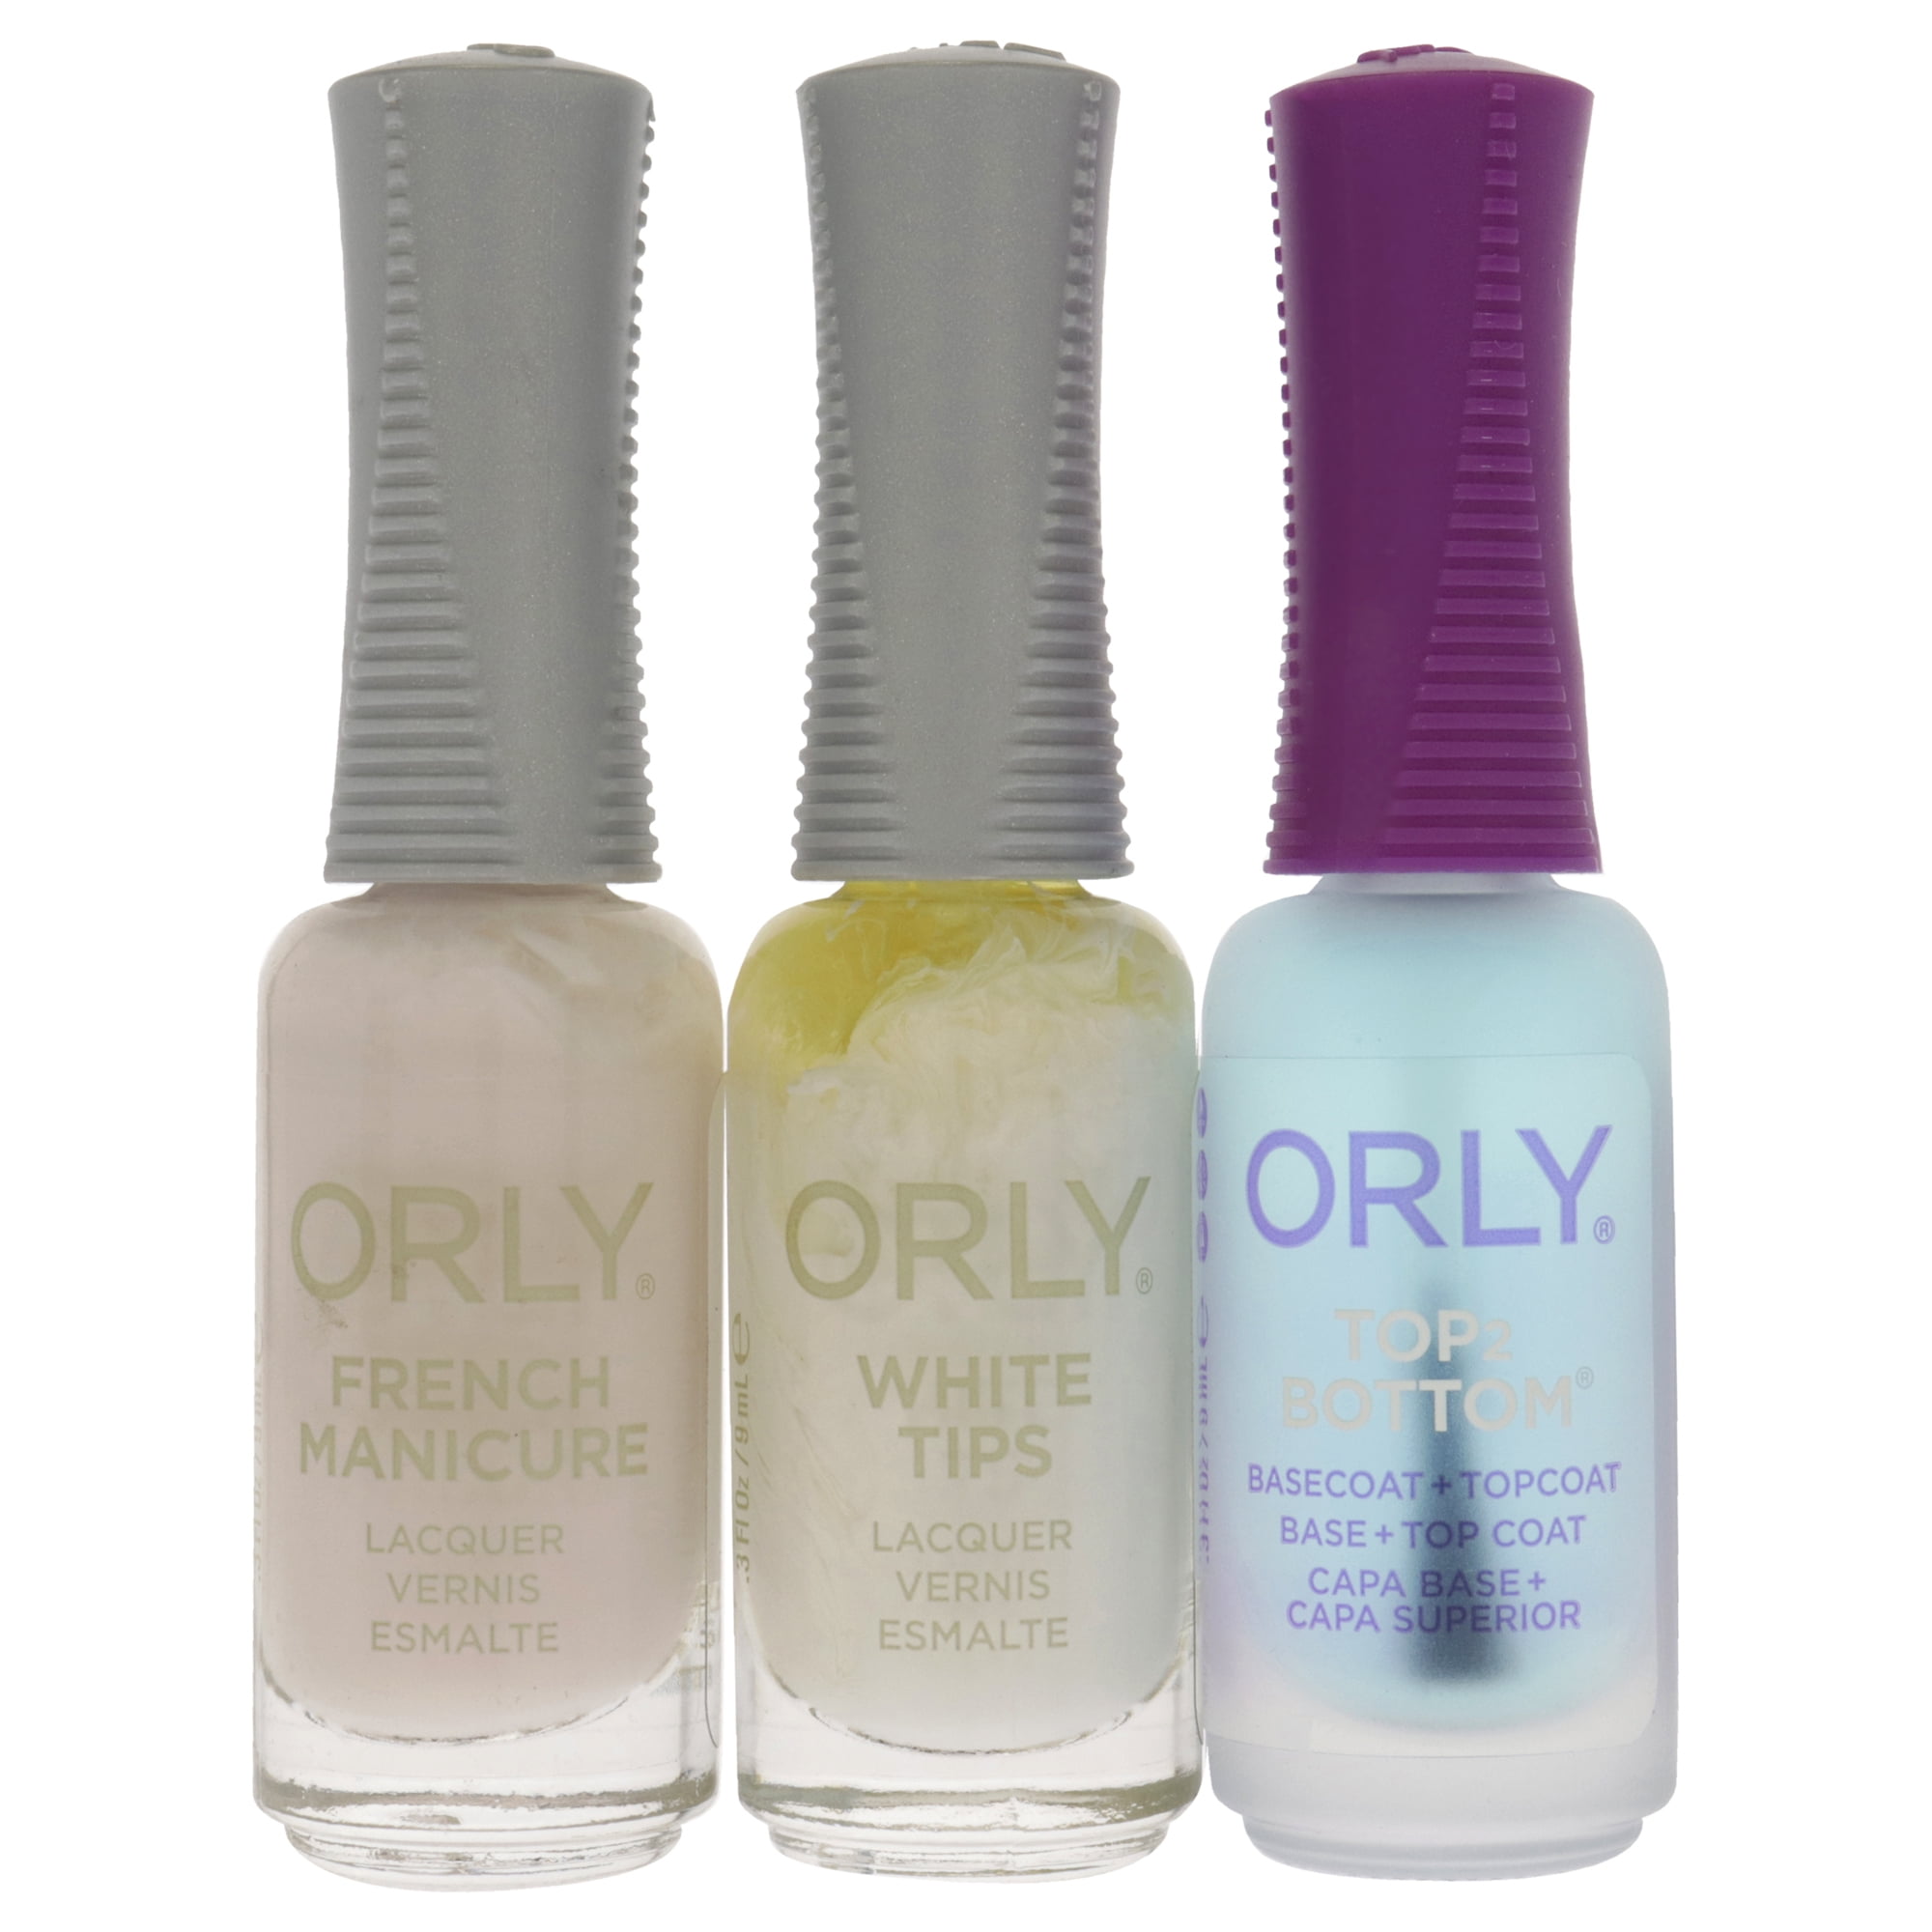 Orly The Original French Manicure Kit Pink Pc Kit Top2 Botton  Base Coat Plus Topcoat, Nail Lacquer White Tips, Nail Lacquer  Pink Nude, Tip Guides White